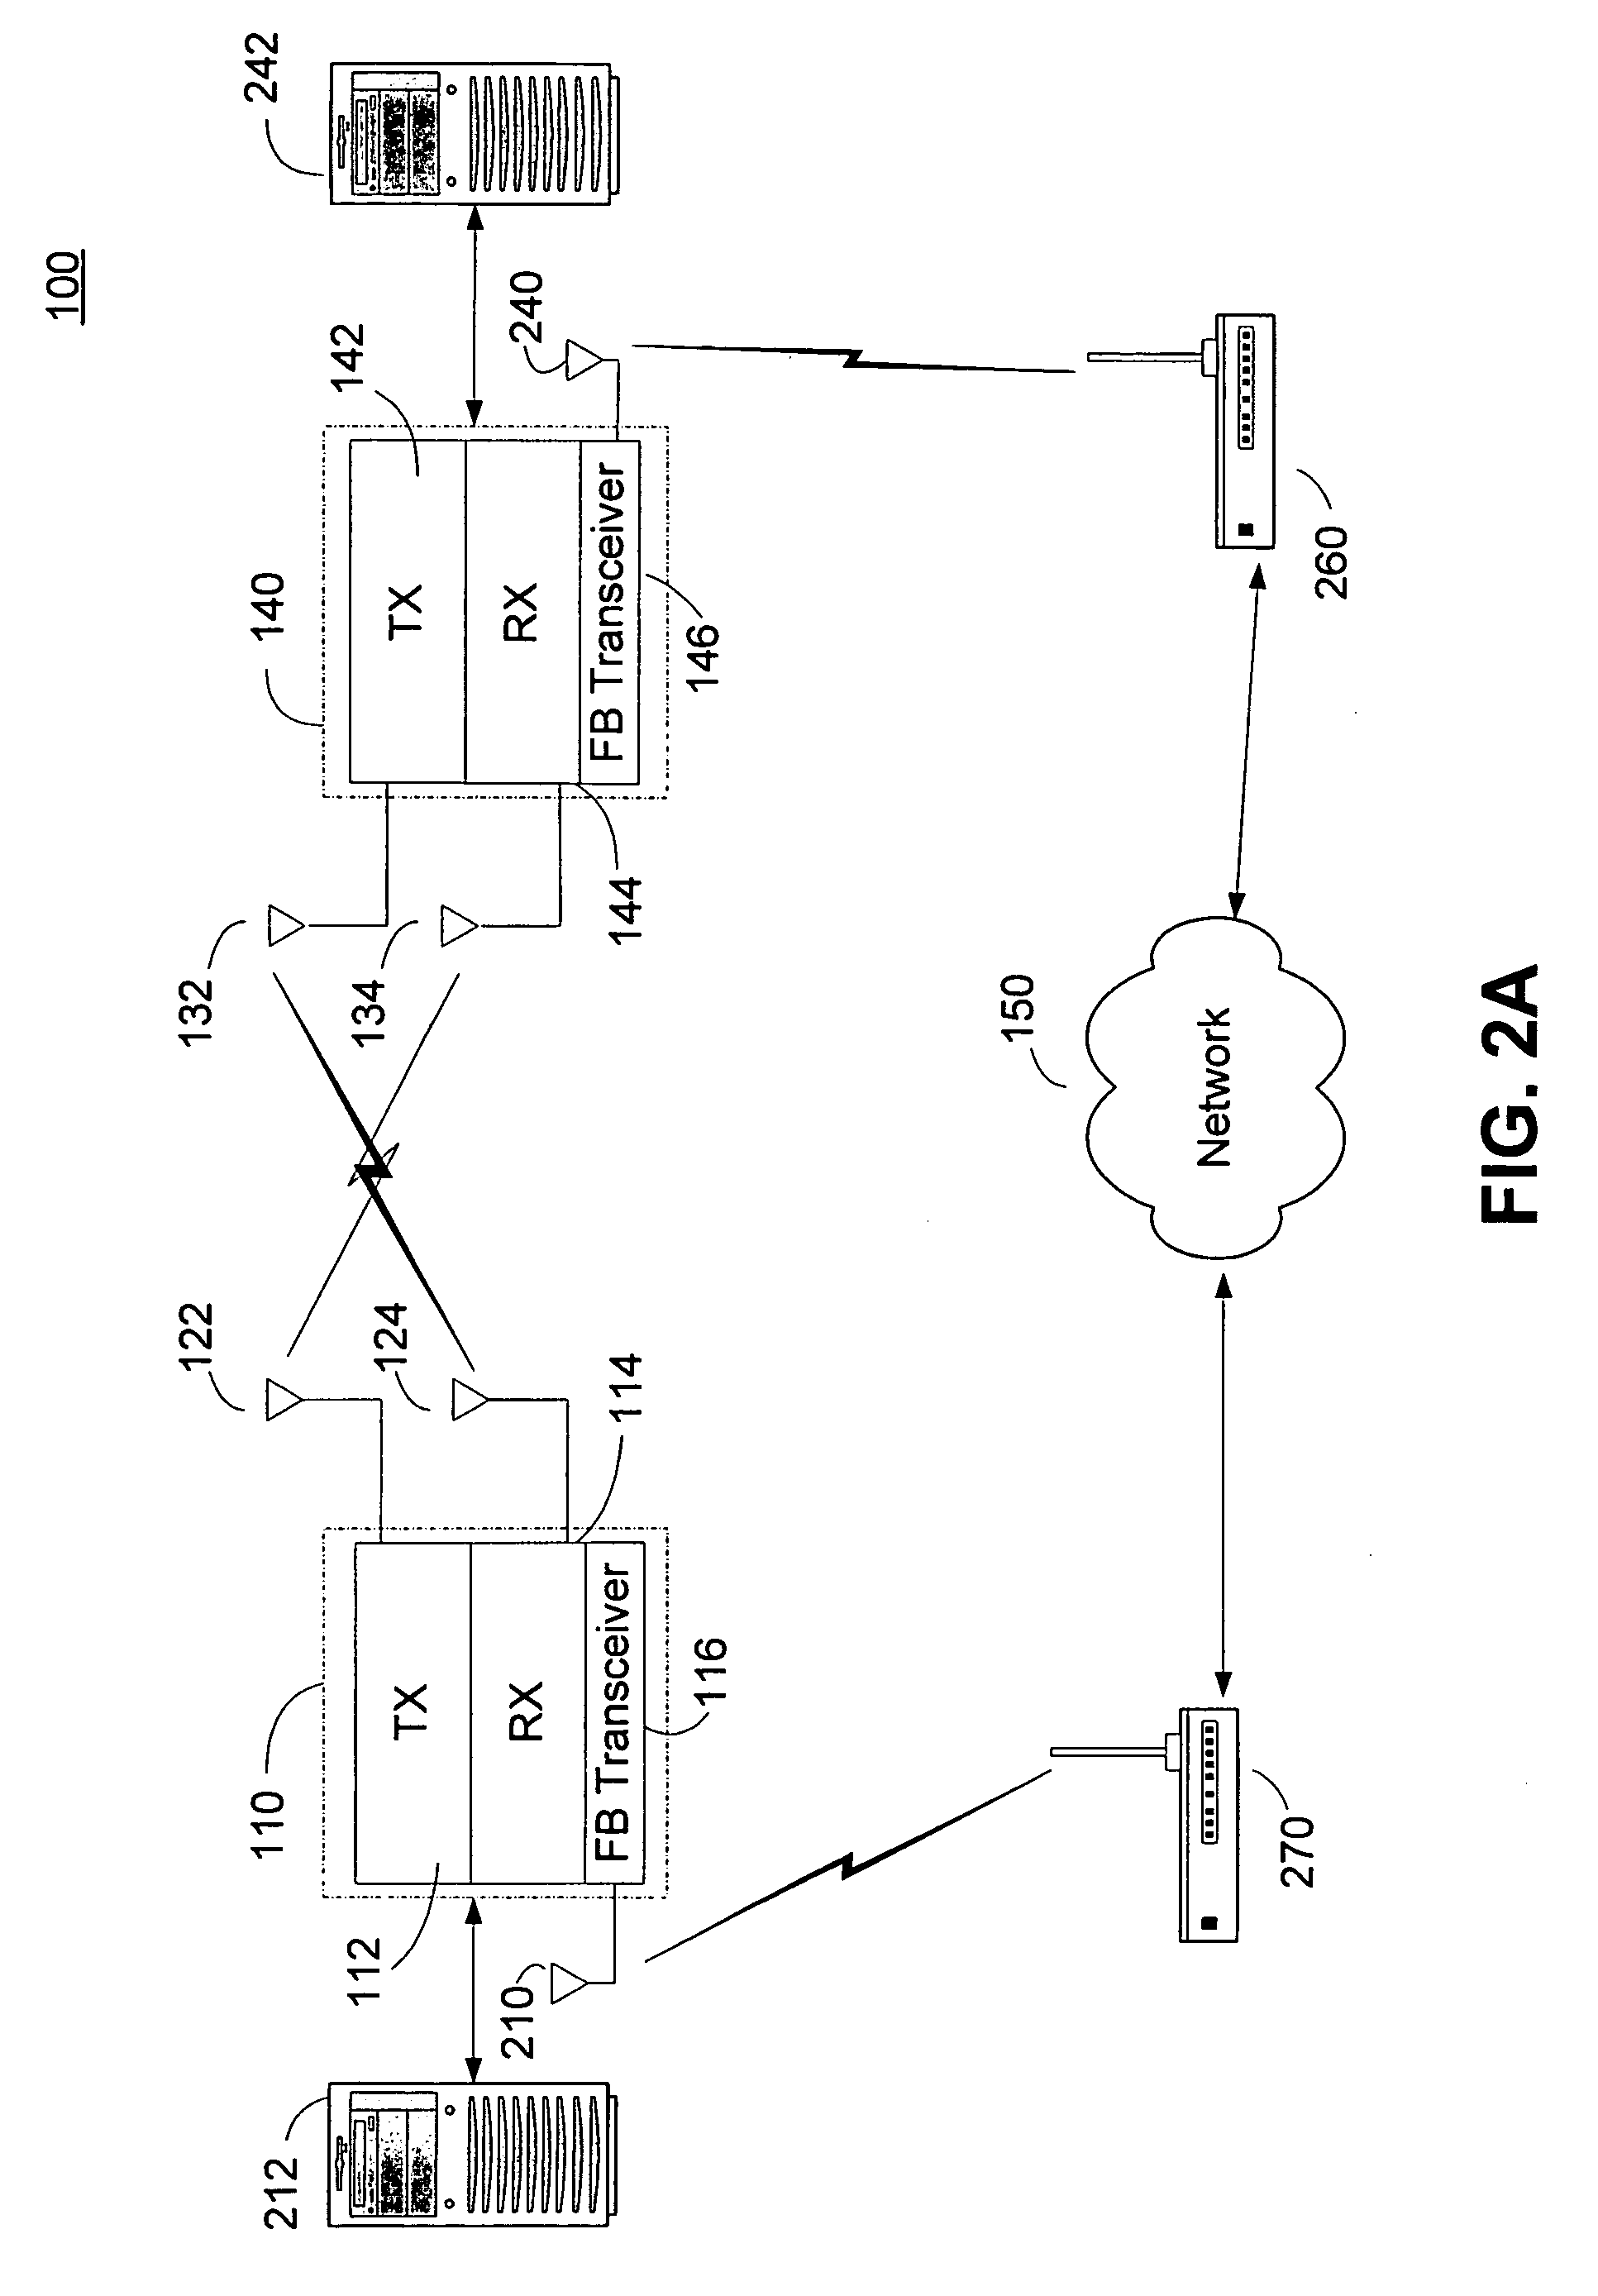 System and method for optimizing a directional communication link